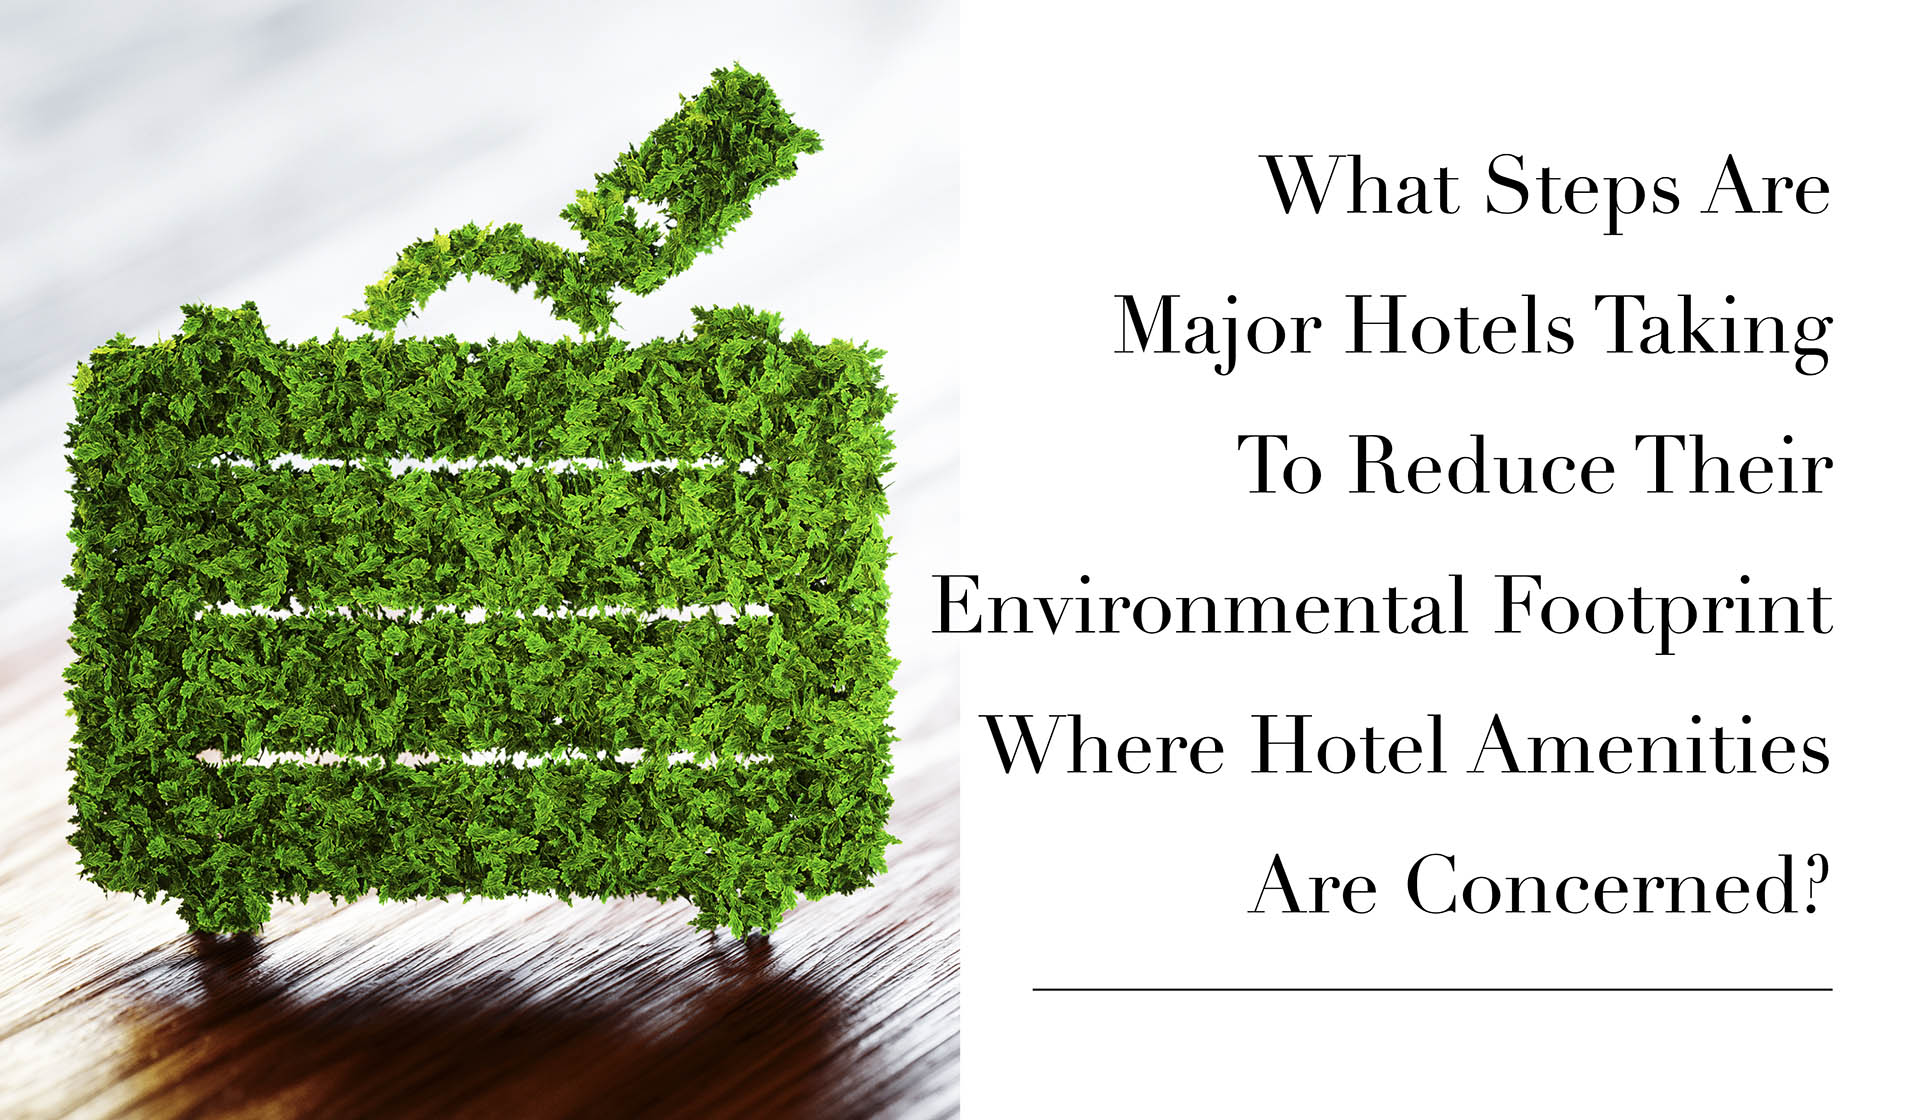 What Steps Are Major Hotels Taking To Reduce Their Environmental Footprint Where Hotel Amenities Are Concerned?